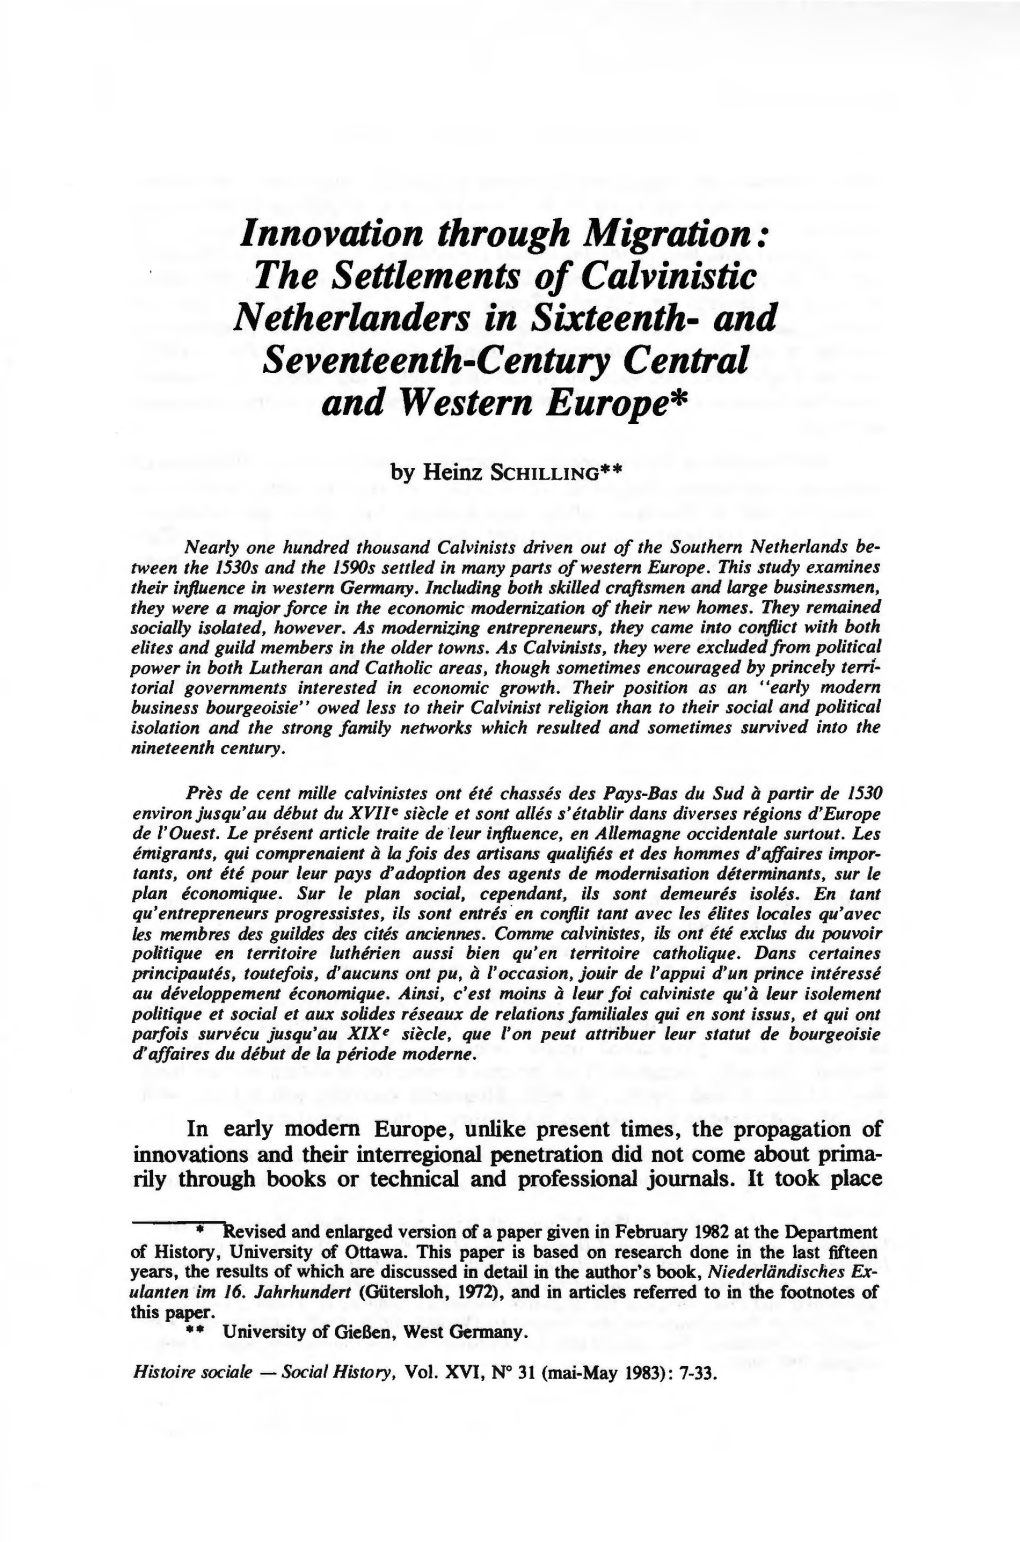 Innovation Through Migration: the Settlements of Calvinistic Netherlanders in Sixteenth- and Seventeenth-Century Central and Western Europe*